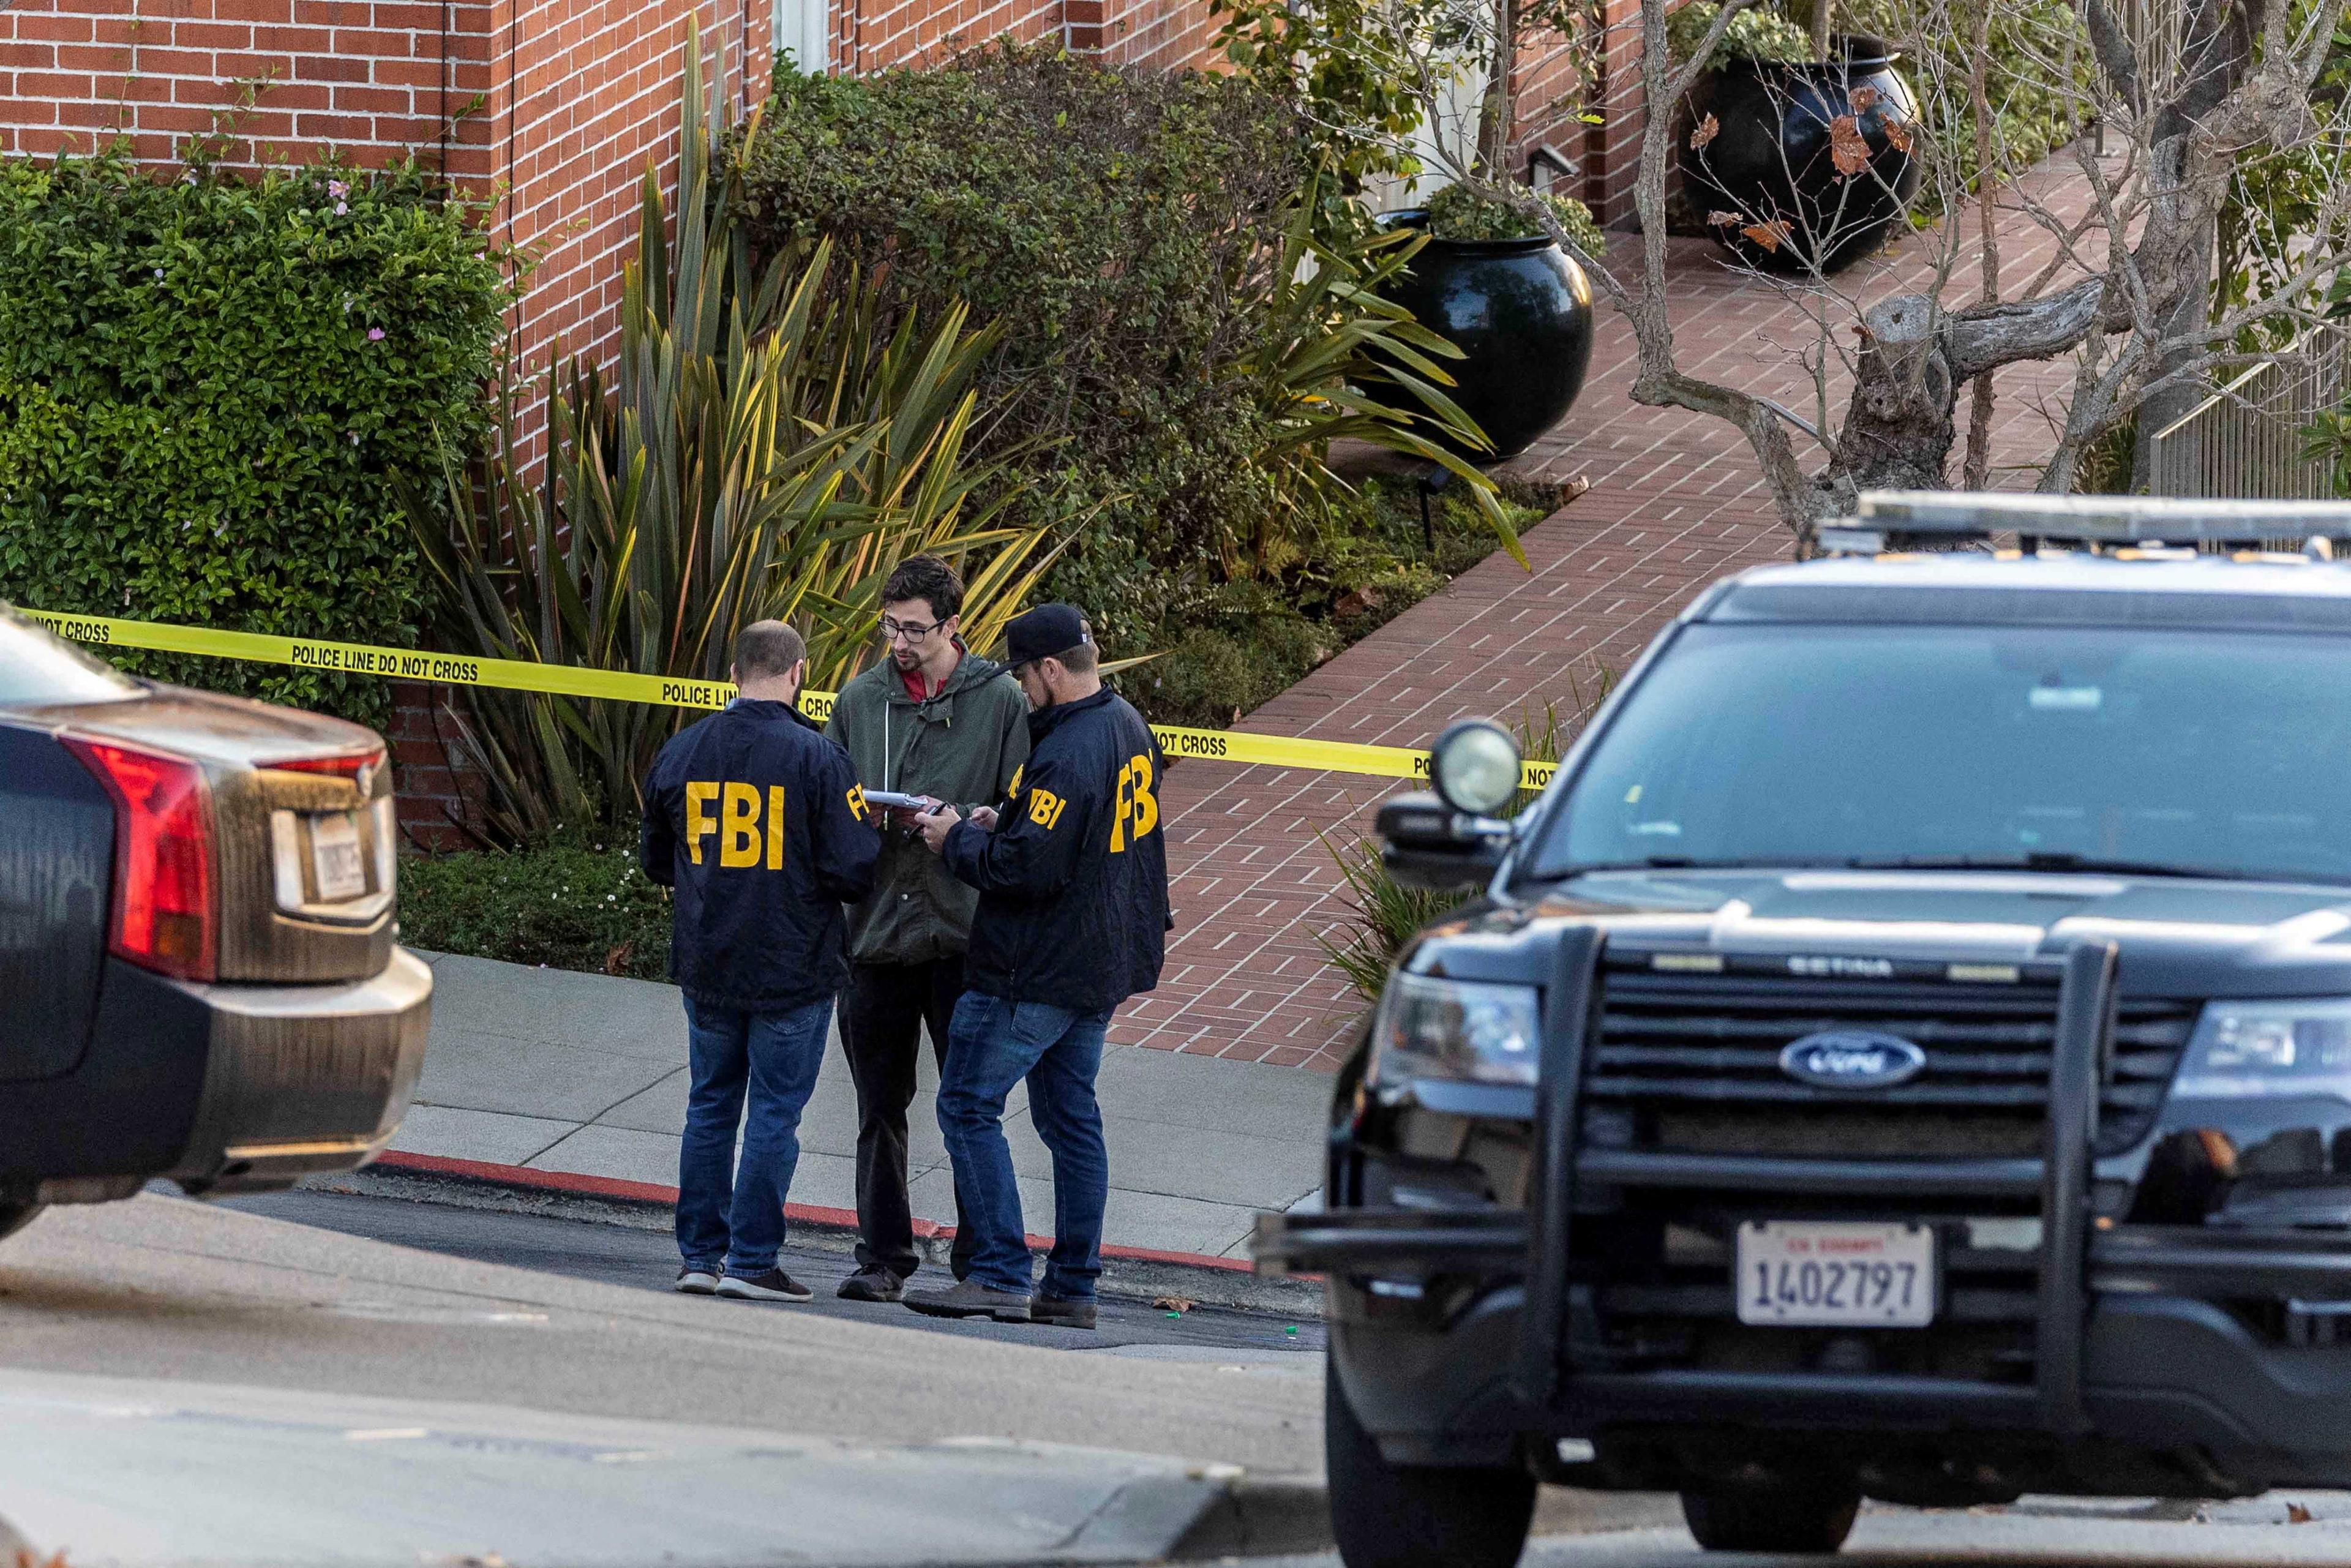 FBI agents work outside the home of US House Speaker Nancy Pelosi where her husband Paul Pelosi was violently assaulted after a break-in at their house, according to a statement from her office, in San Francisco, California, US, Oct 28. Photo: Reuters